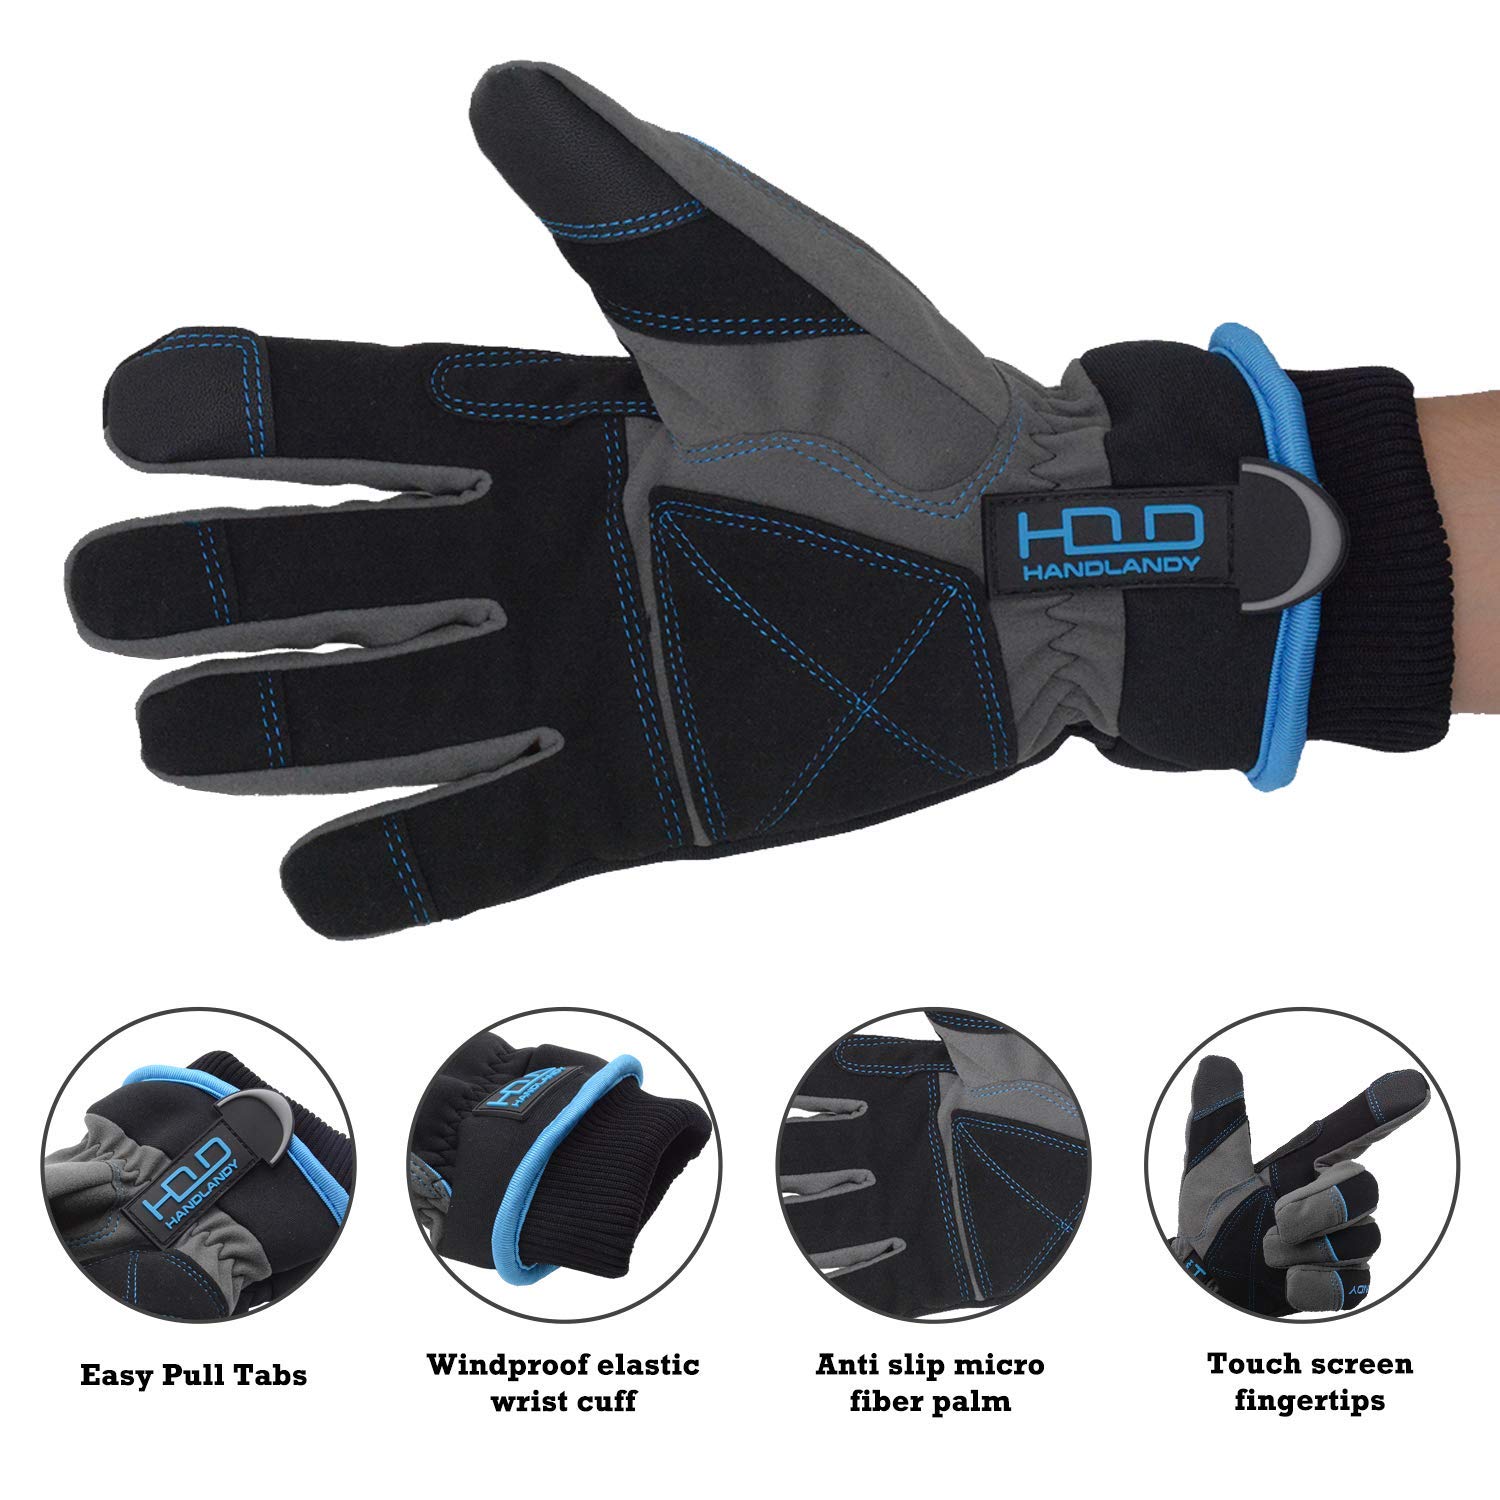 HANDLANDY Waterproof Insulated Work Gloves, 3M Thinsulate Thermal Winter Gloves for Men Women Touch Screen, Warm Ski Snowboard Cold Weather Gloves (Large, Blue)